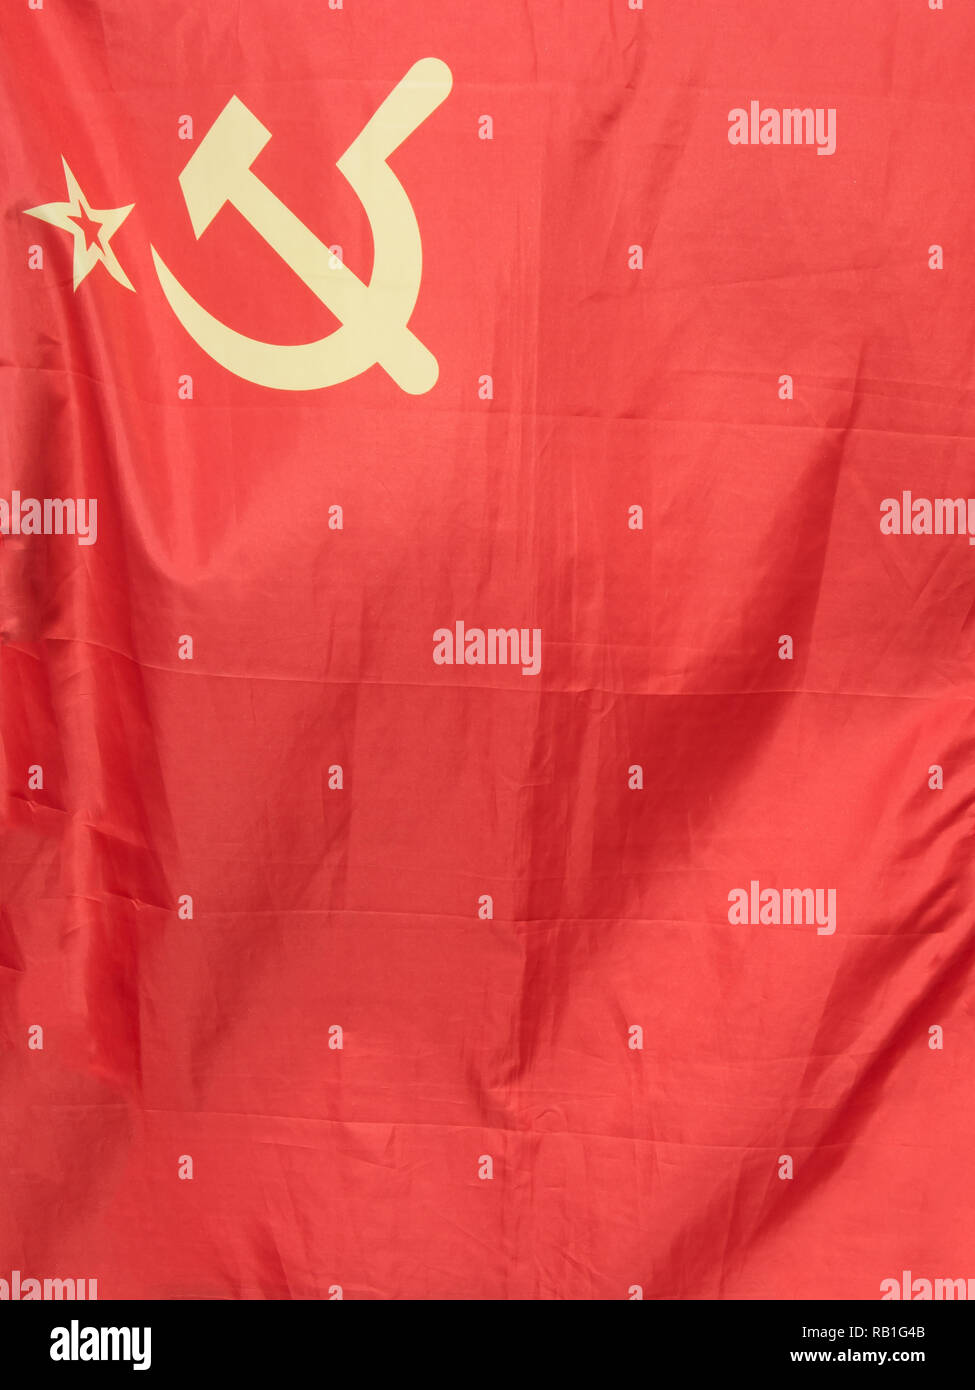 Hammer And Sickle: Red Flag of The DDR, The German Democratic Republic Stock Photo